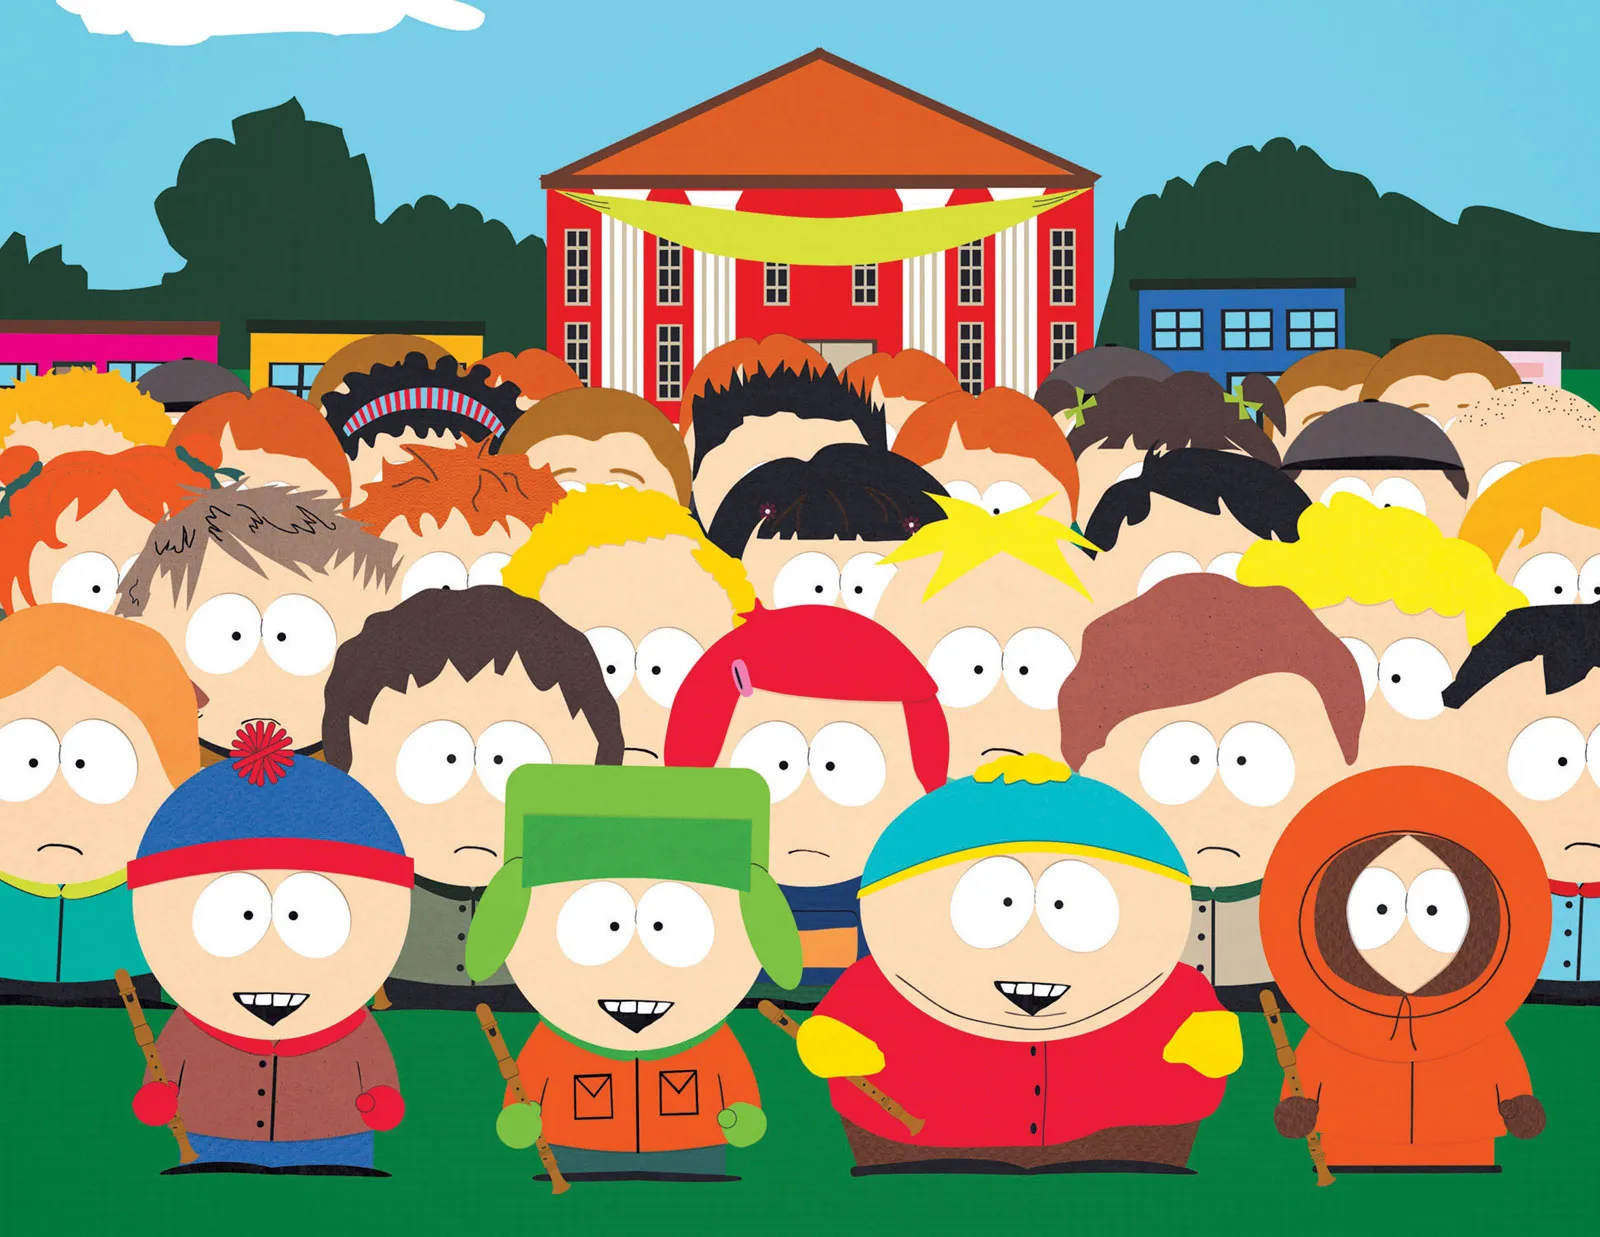 Is "South Park" Gracing the Disney+ Roster?